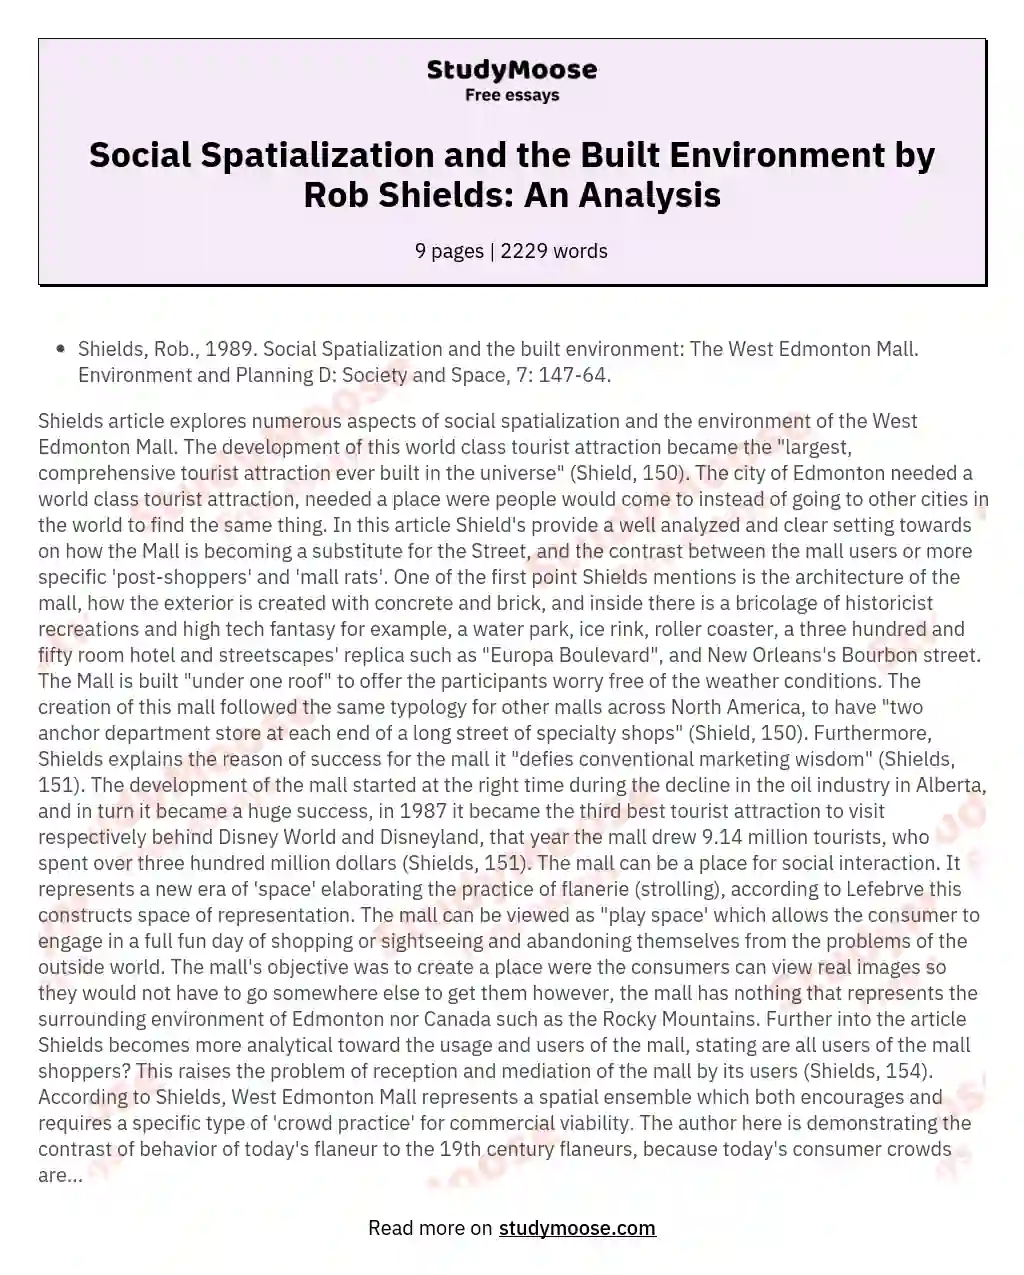 Social Spatialization and the Built Environment by Rob Shields: An Analysis essay